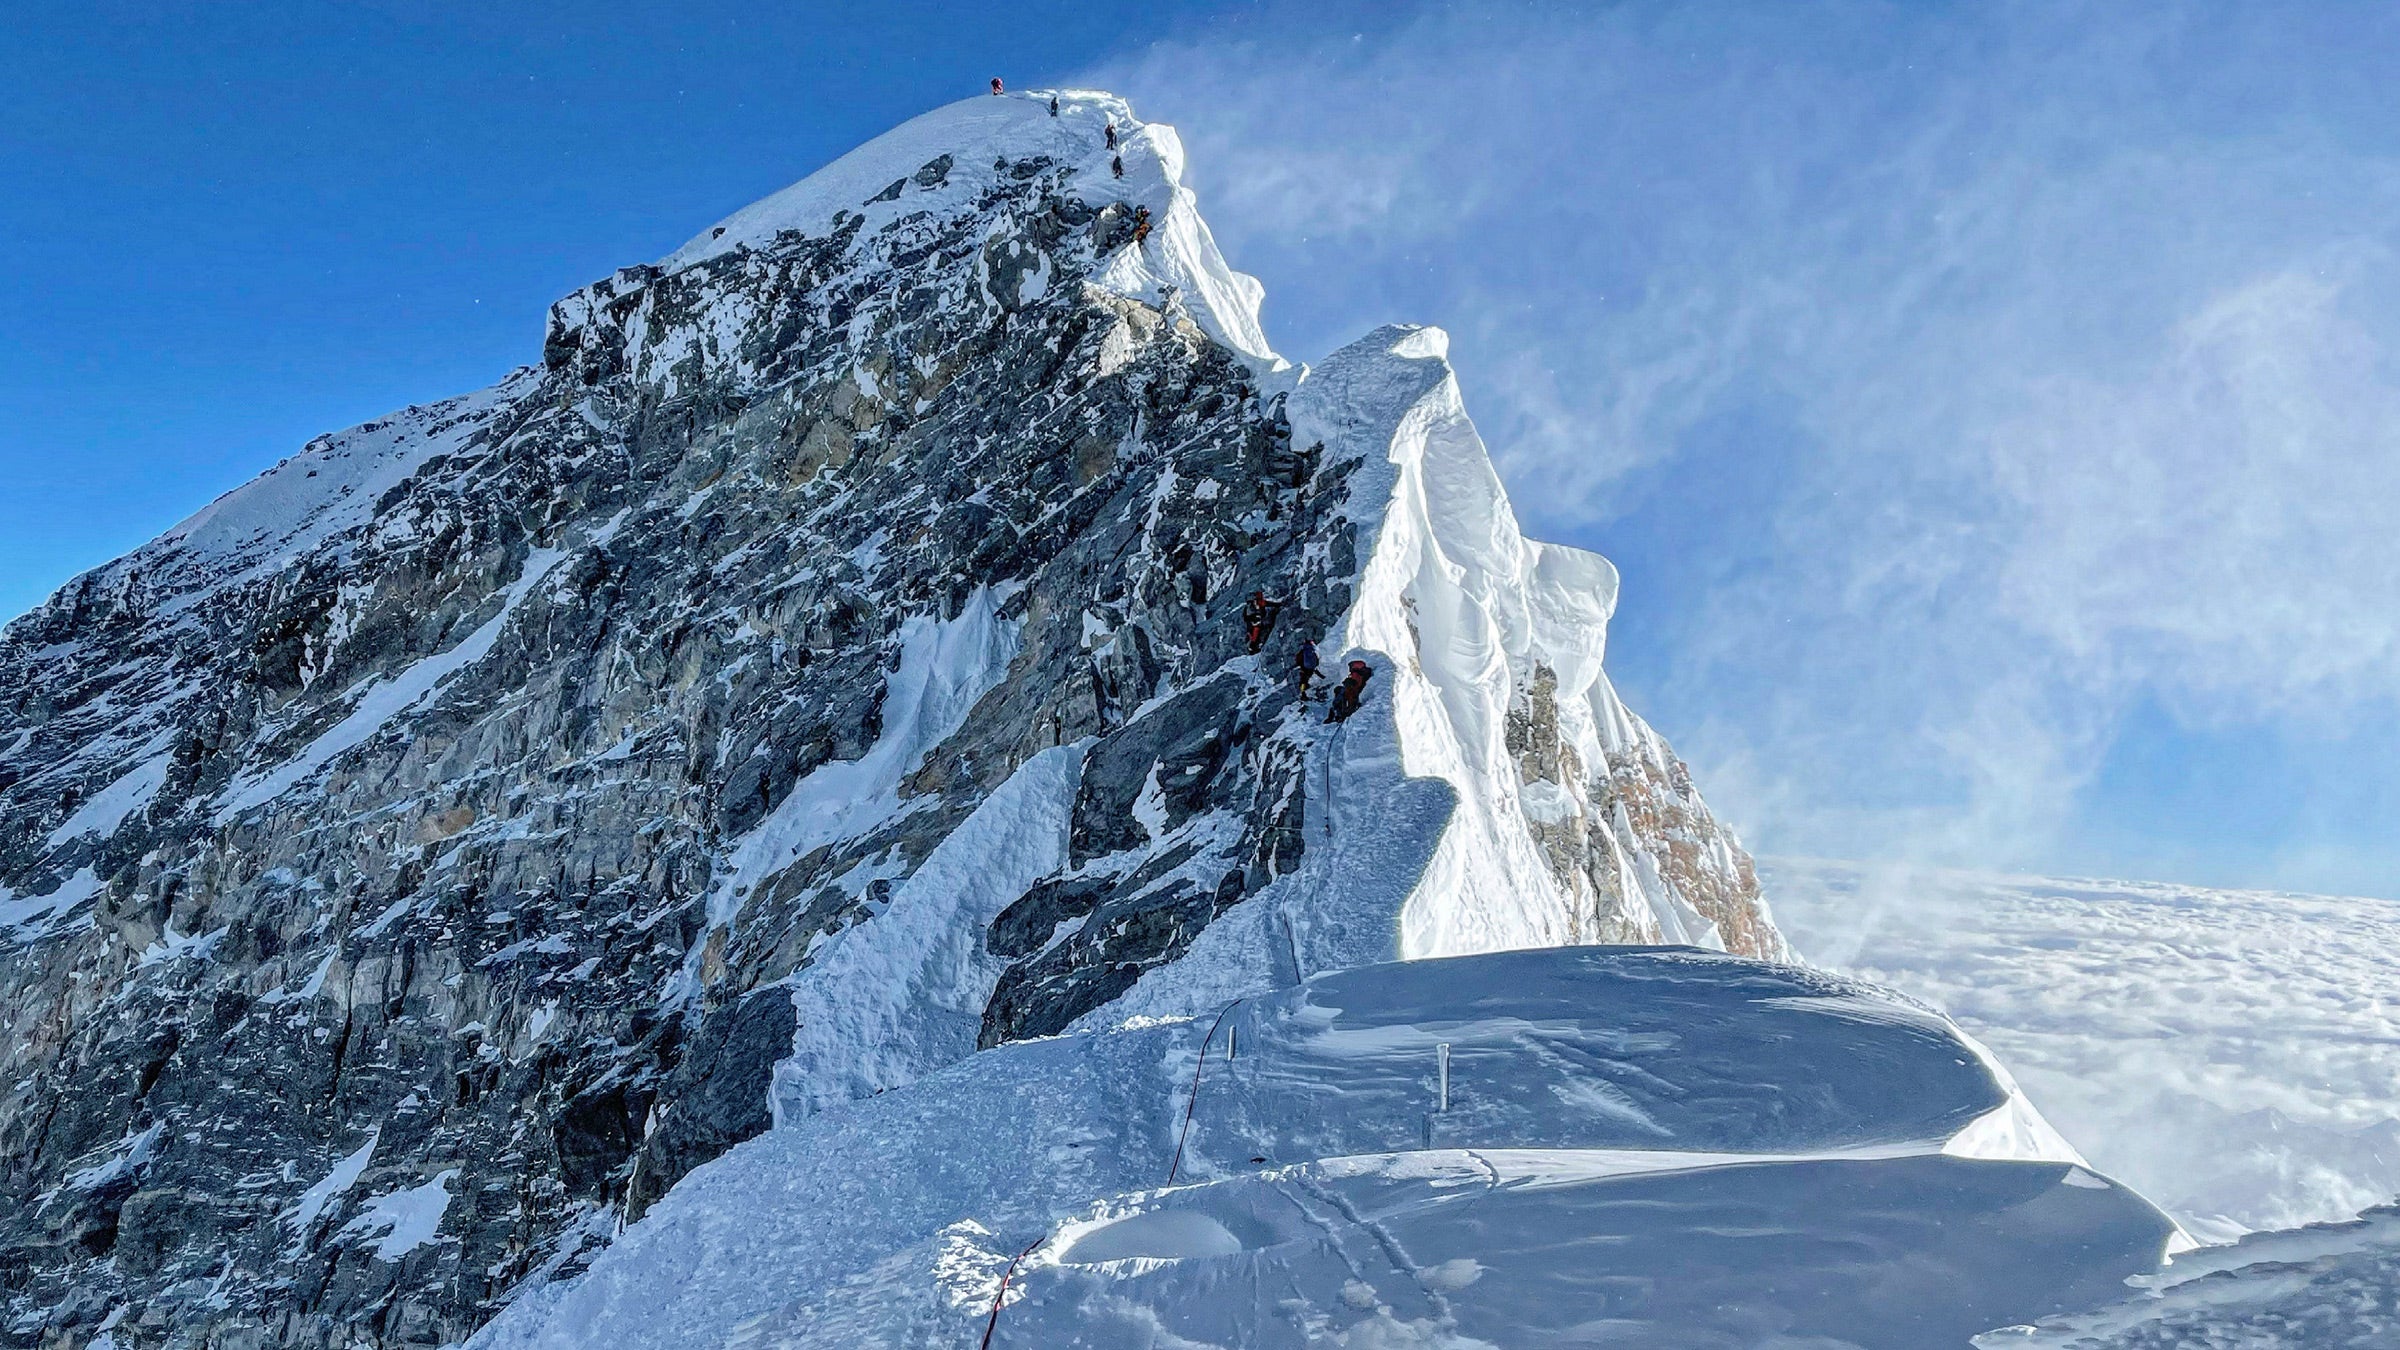 Mount Everest's summit is blown by high winds.